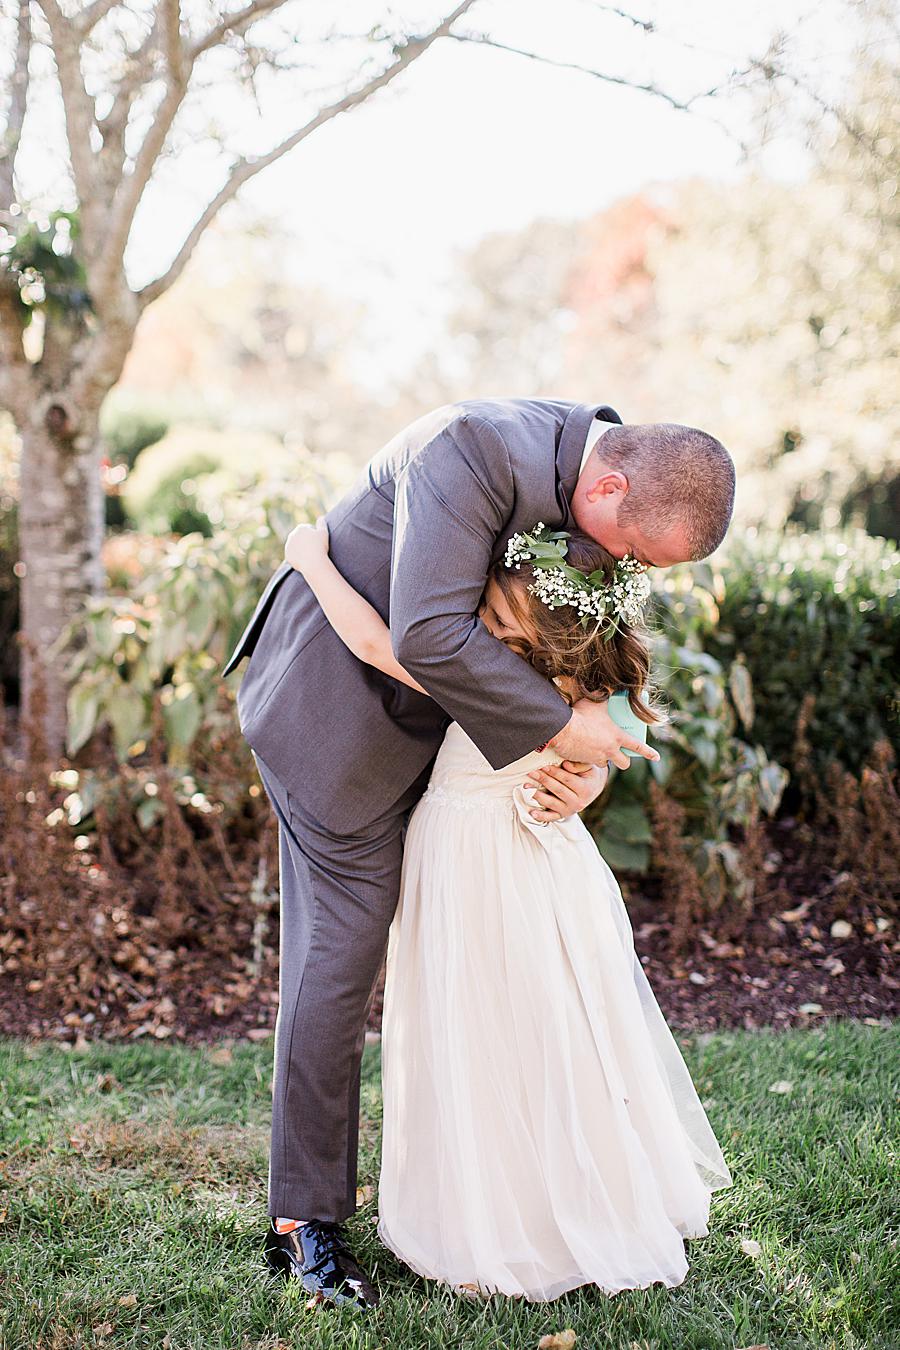 Hugging the flower girl at this Wedding at Castleton Farms by Knoxville Wedding Photographer, Amanda May Photos.